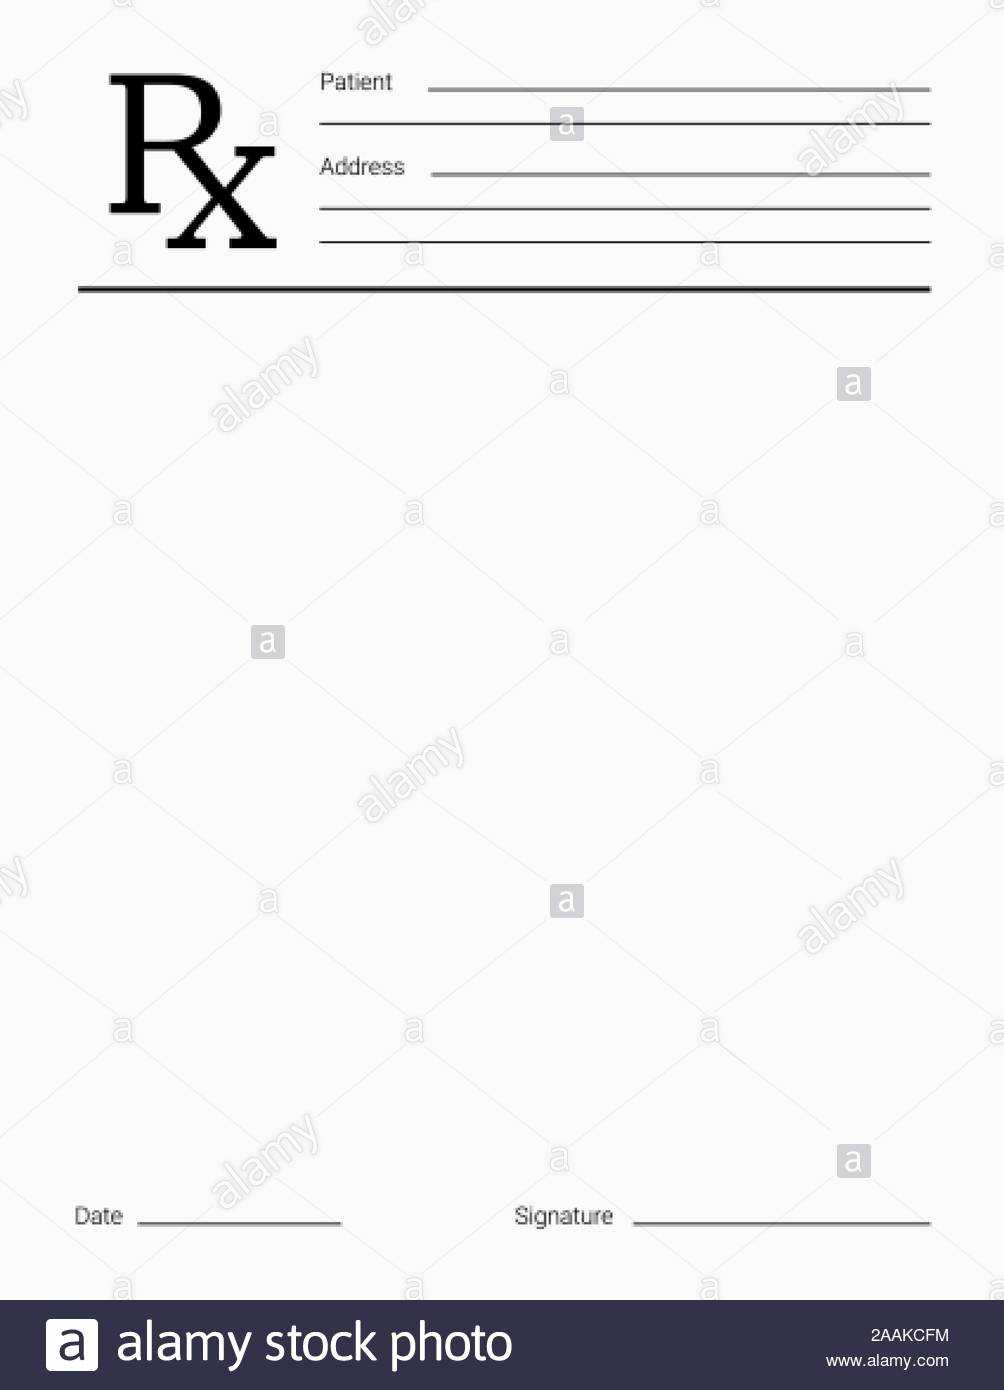 Doctor's Rx Pad Template. Blank Medical Prescription Form Pertaining To Blank Prescription Pad Template